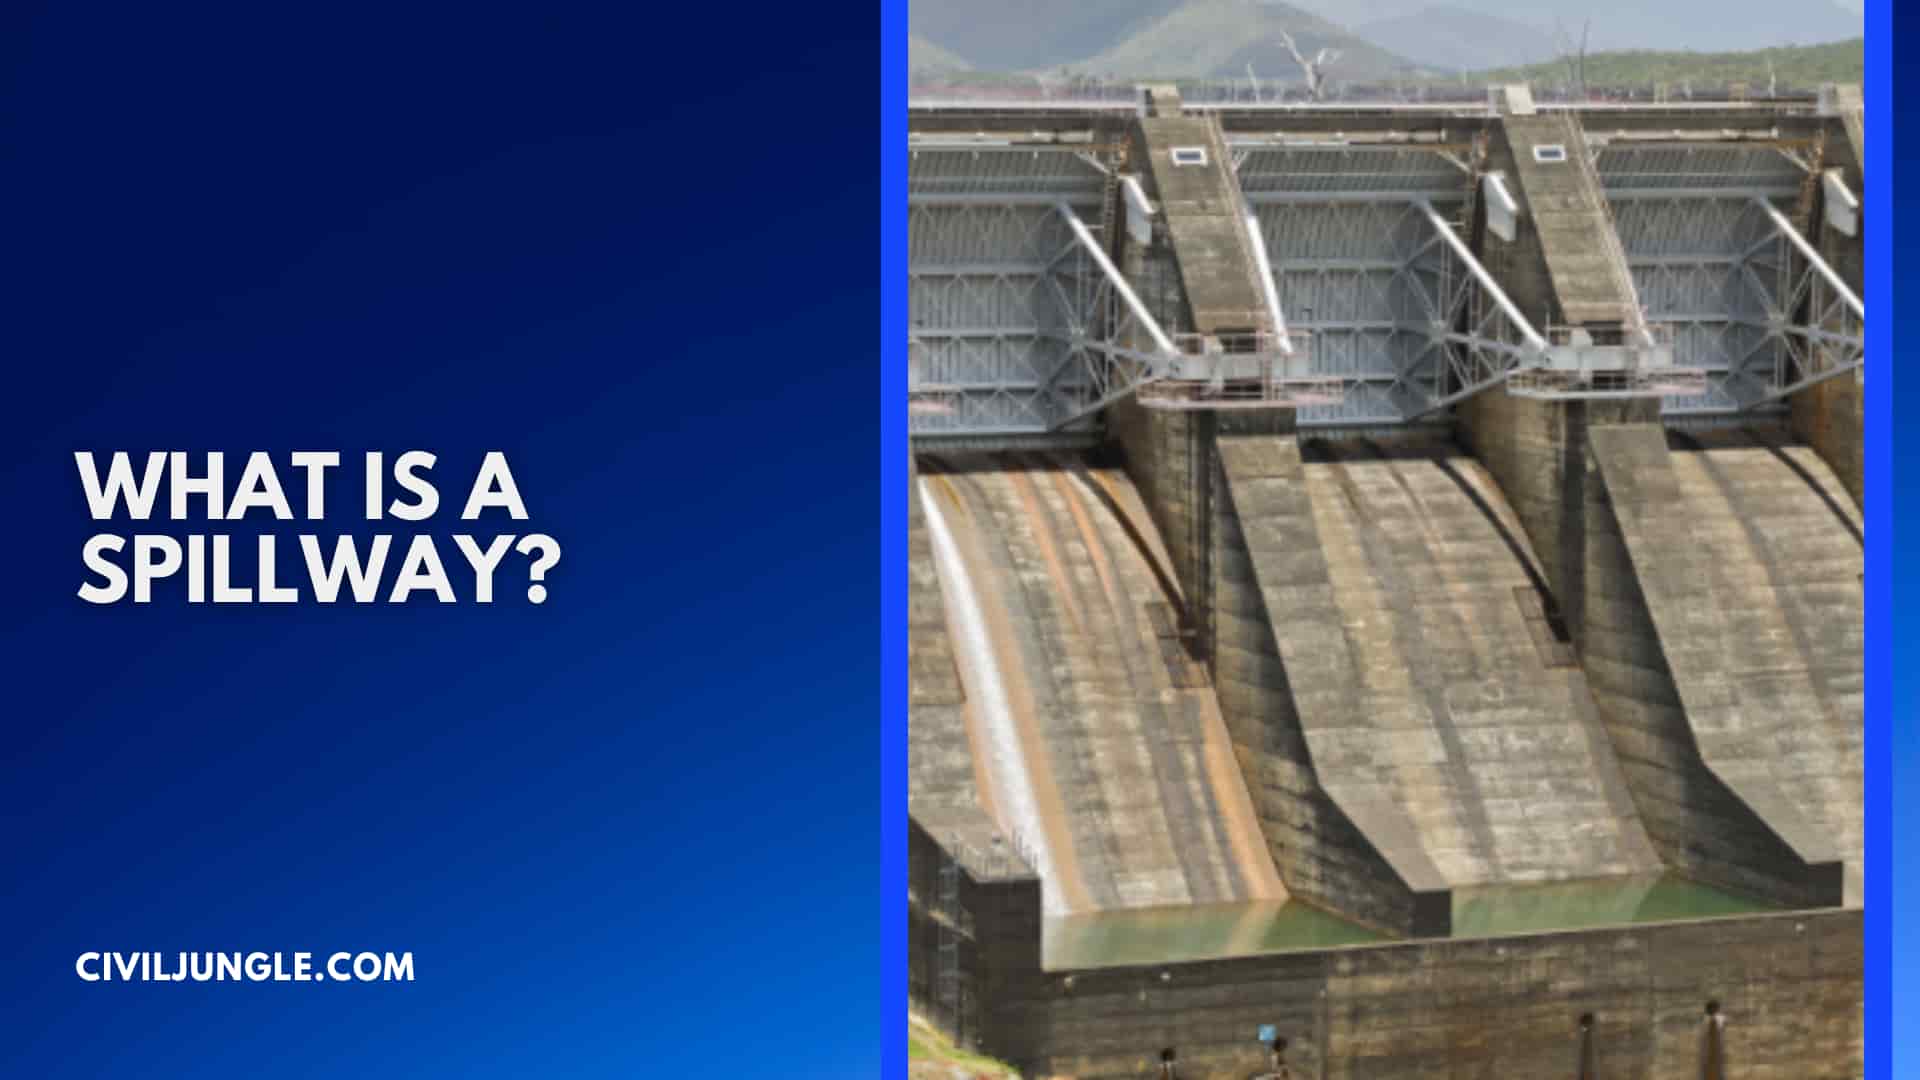 What Is a Spillway?